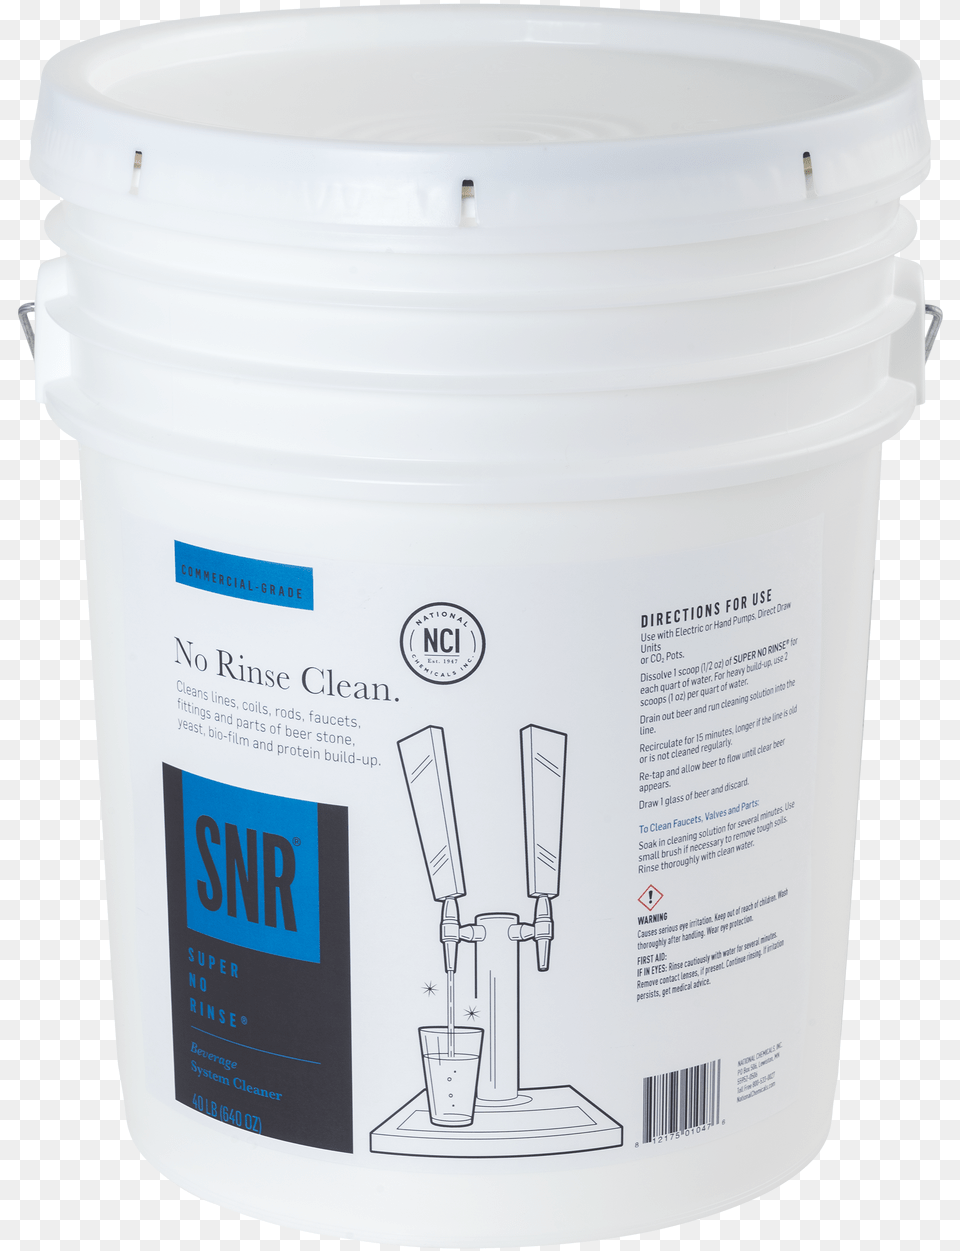 Super No Rinse Beer Line Cleaning Bucket For Sale Lid, Hot Tub, Tub Png